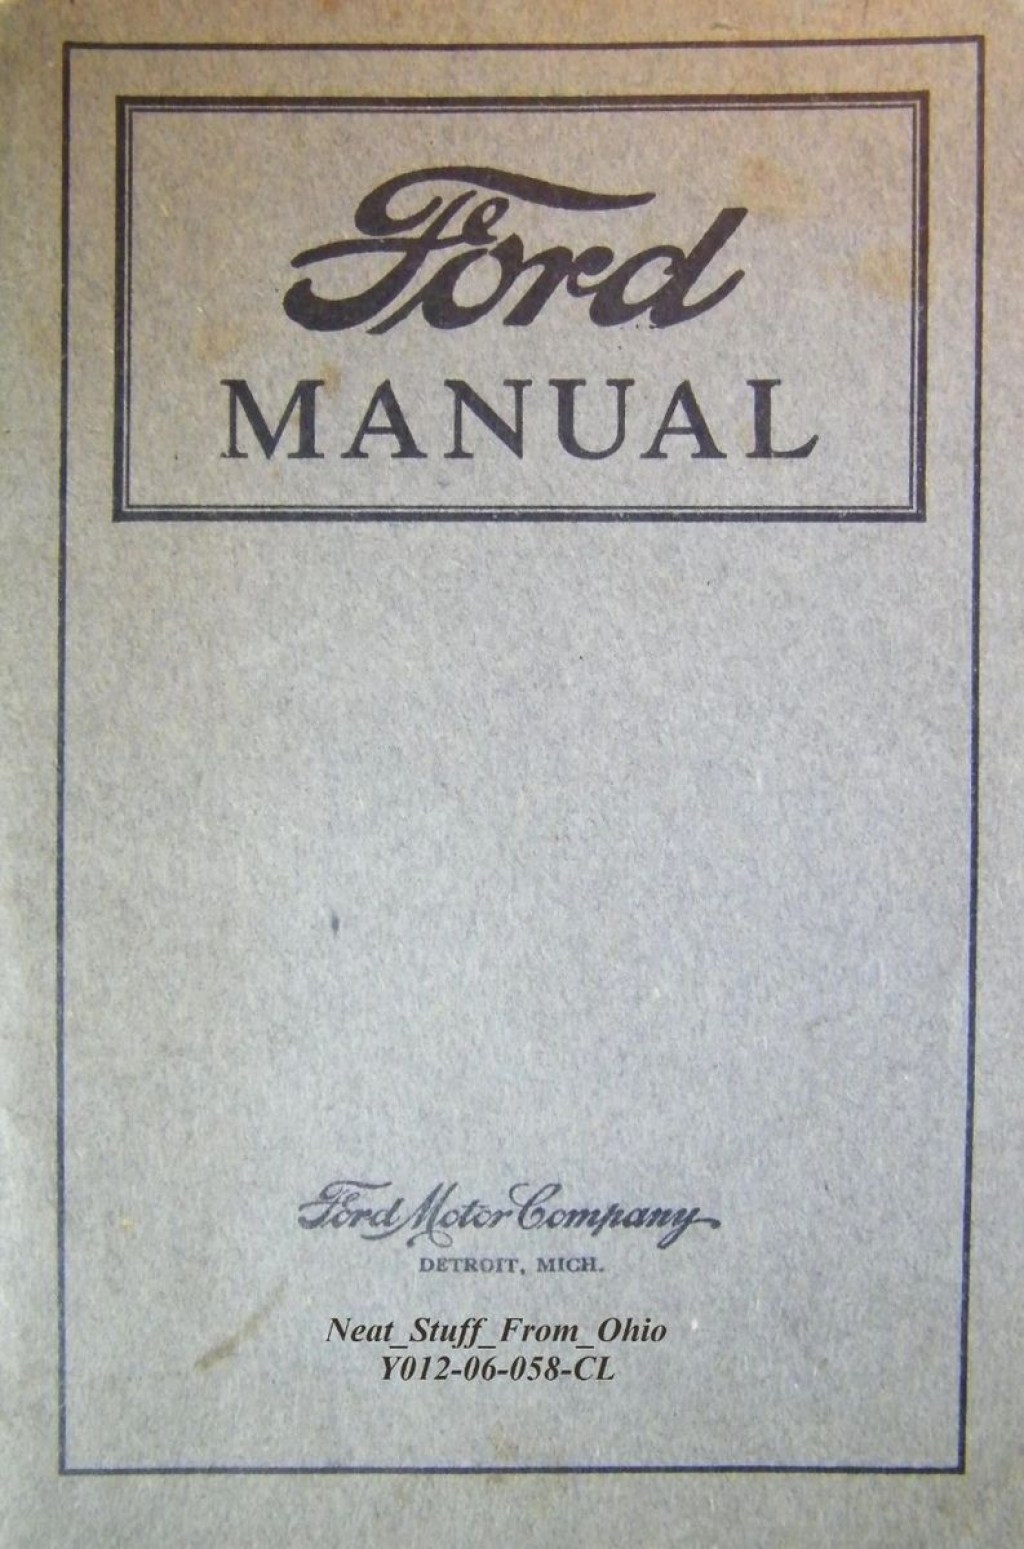 Picture of: FORD MANUAL – FORD PRODUCED – FOR OWNERS & OPERATORS – INTERESTING BOOK!  ©